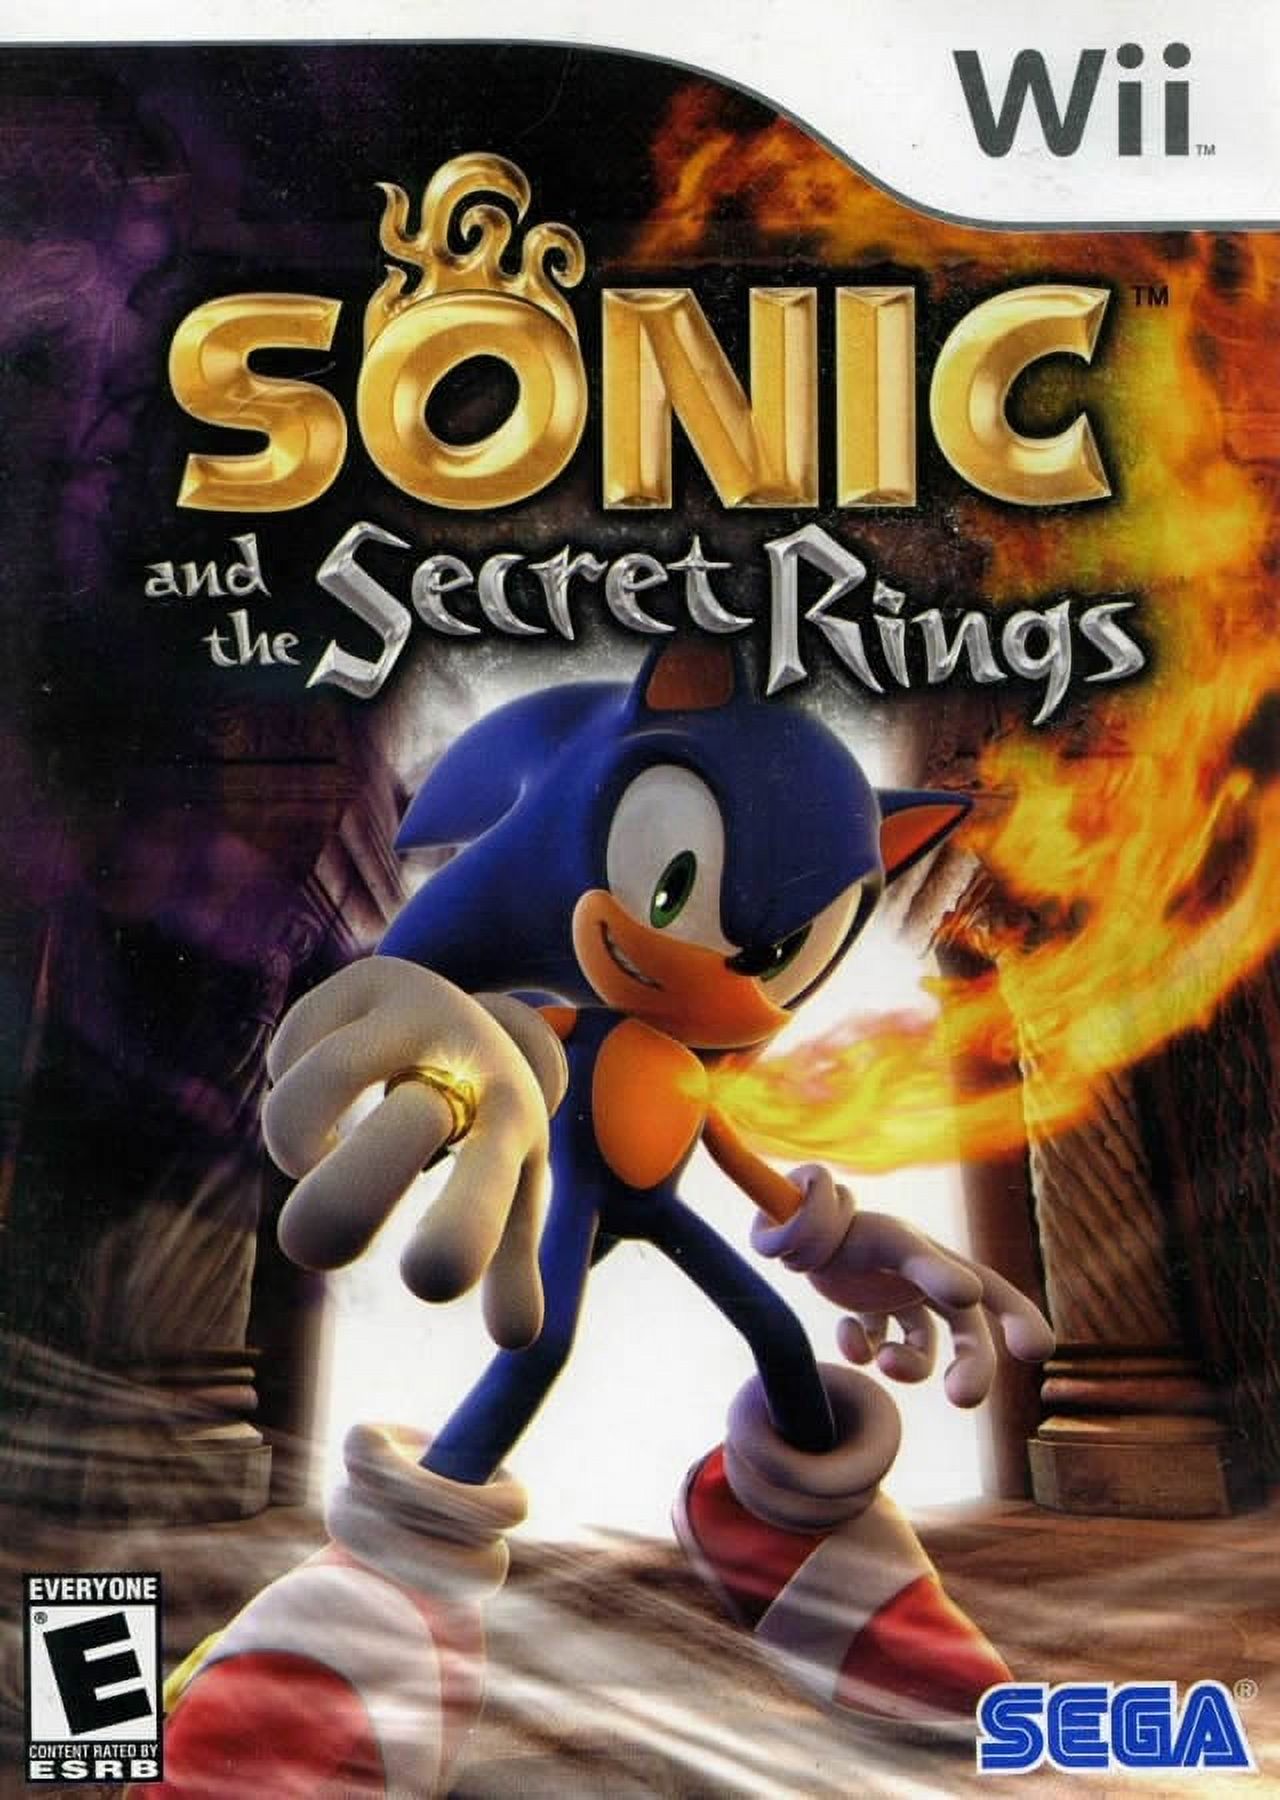 Sonic and the Secret Rings, Sega, Nintendo Wii, [Physical] - image 1 of 14